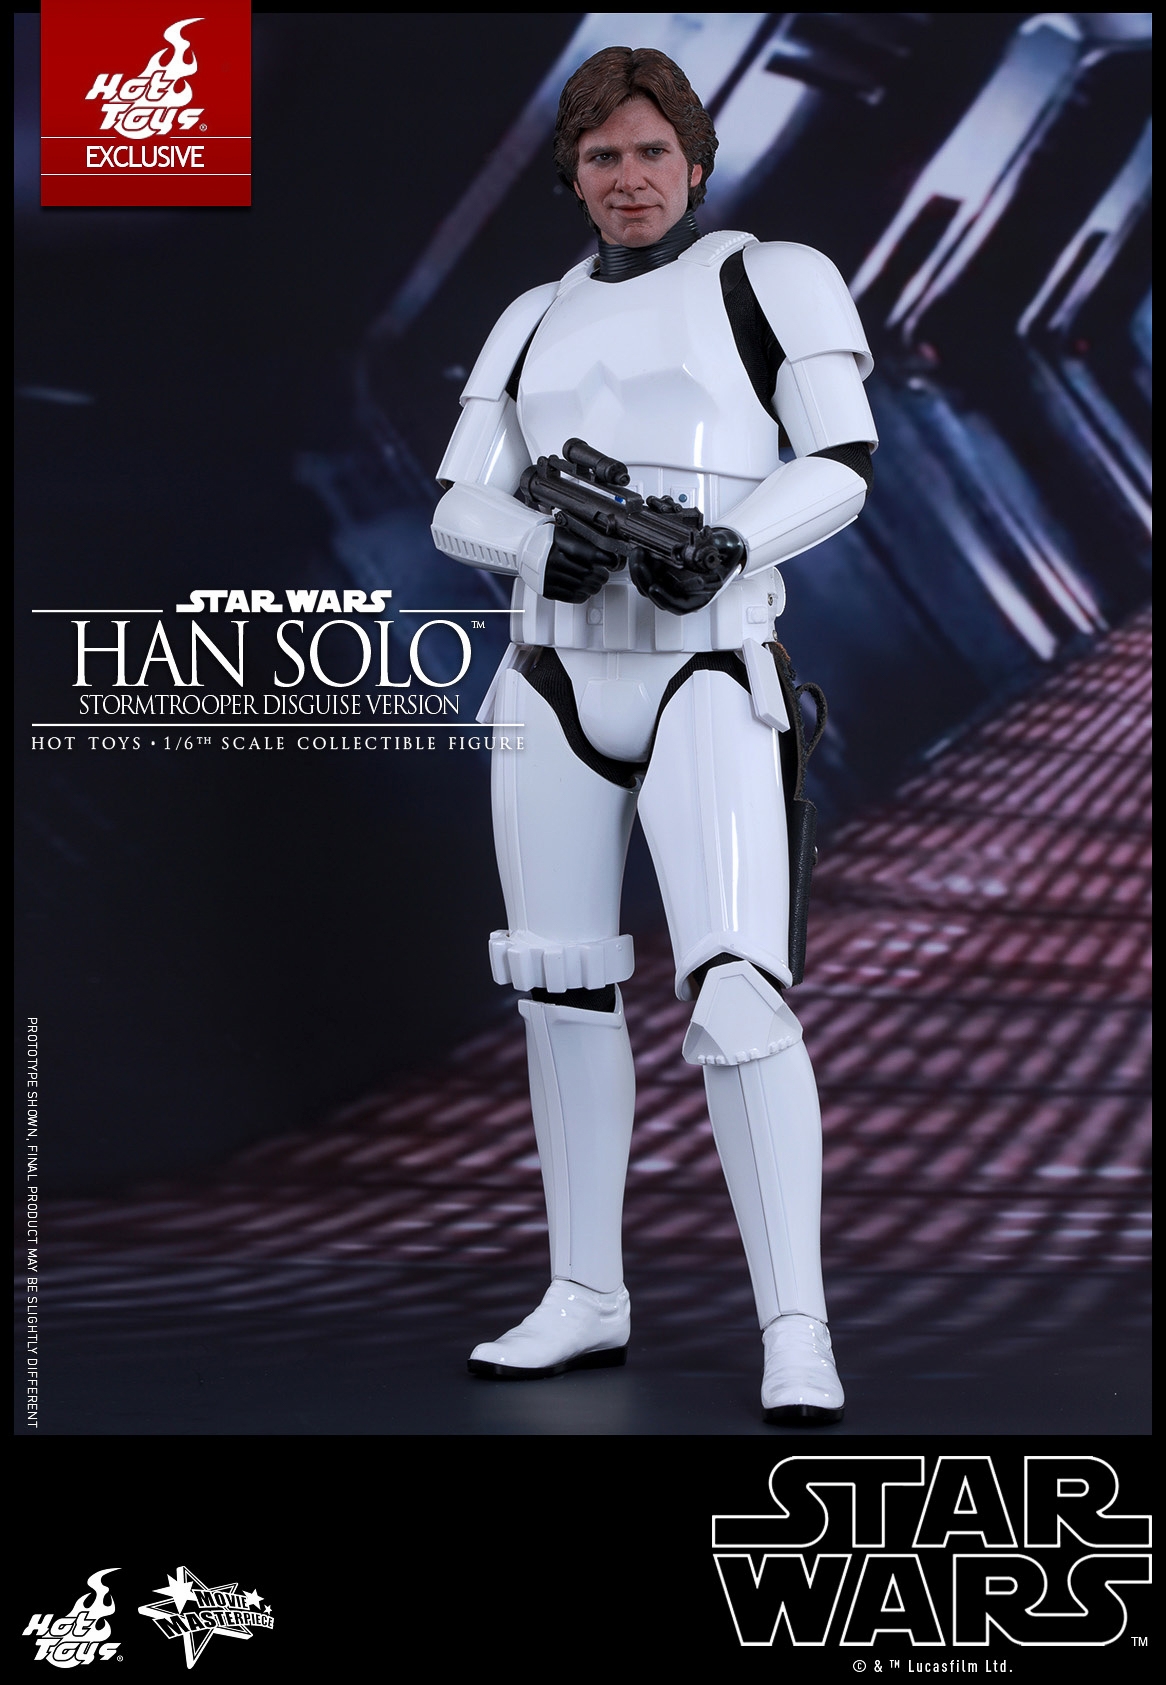 Hot-Toys-MMS418-Star-Wars-Han-Solo-Stormtrooper-Disguise-013.jpg